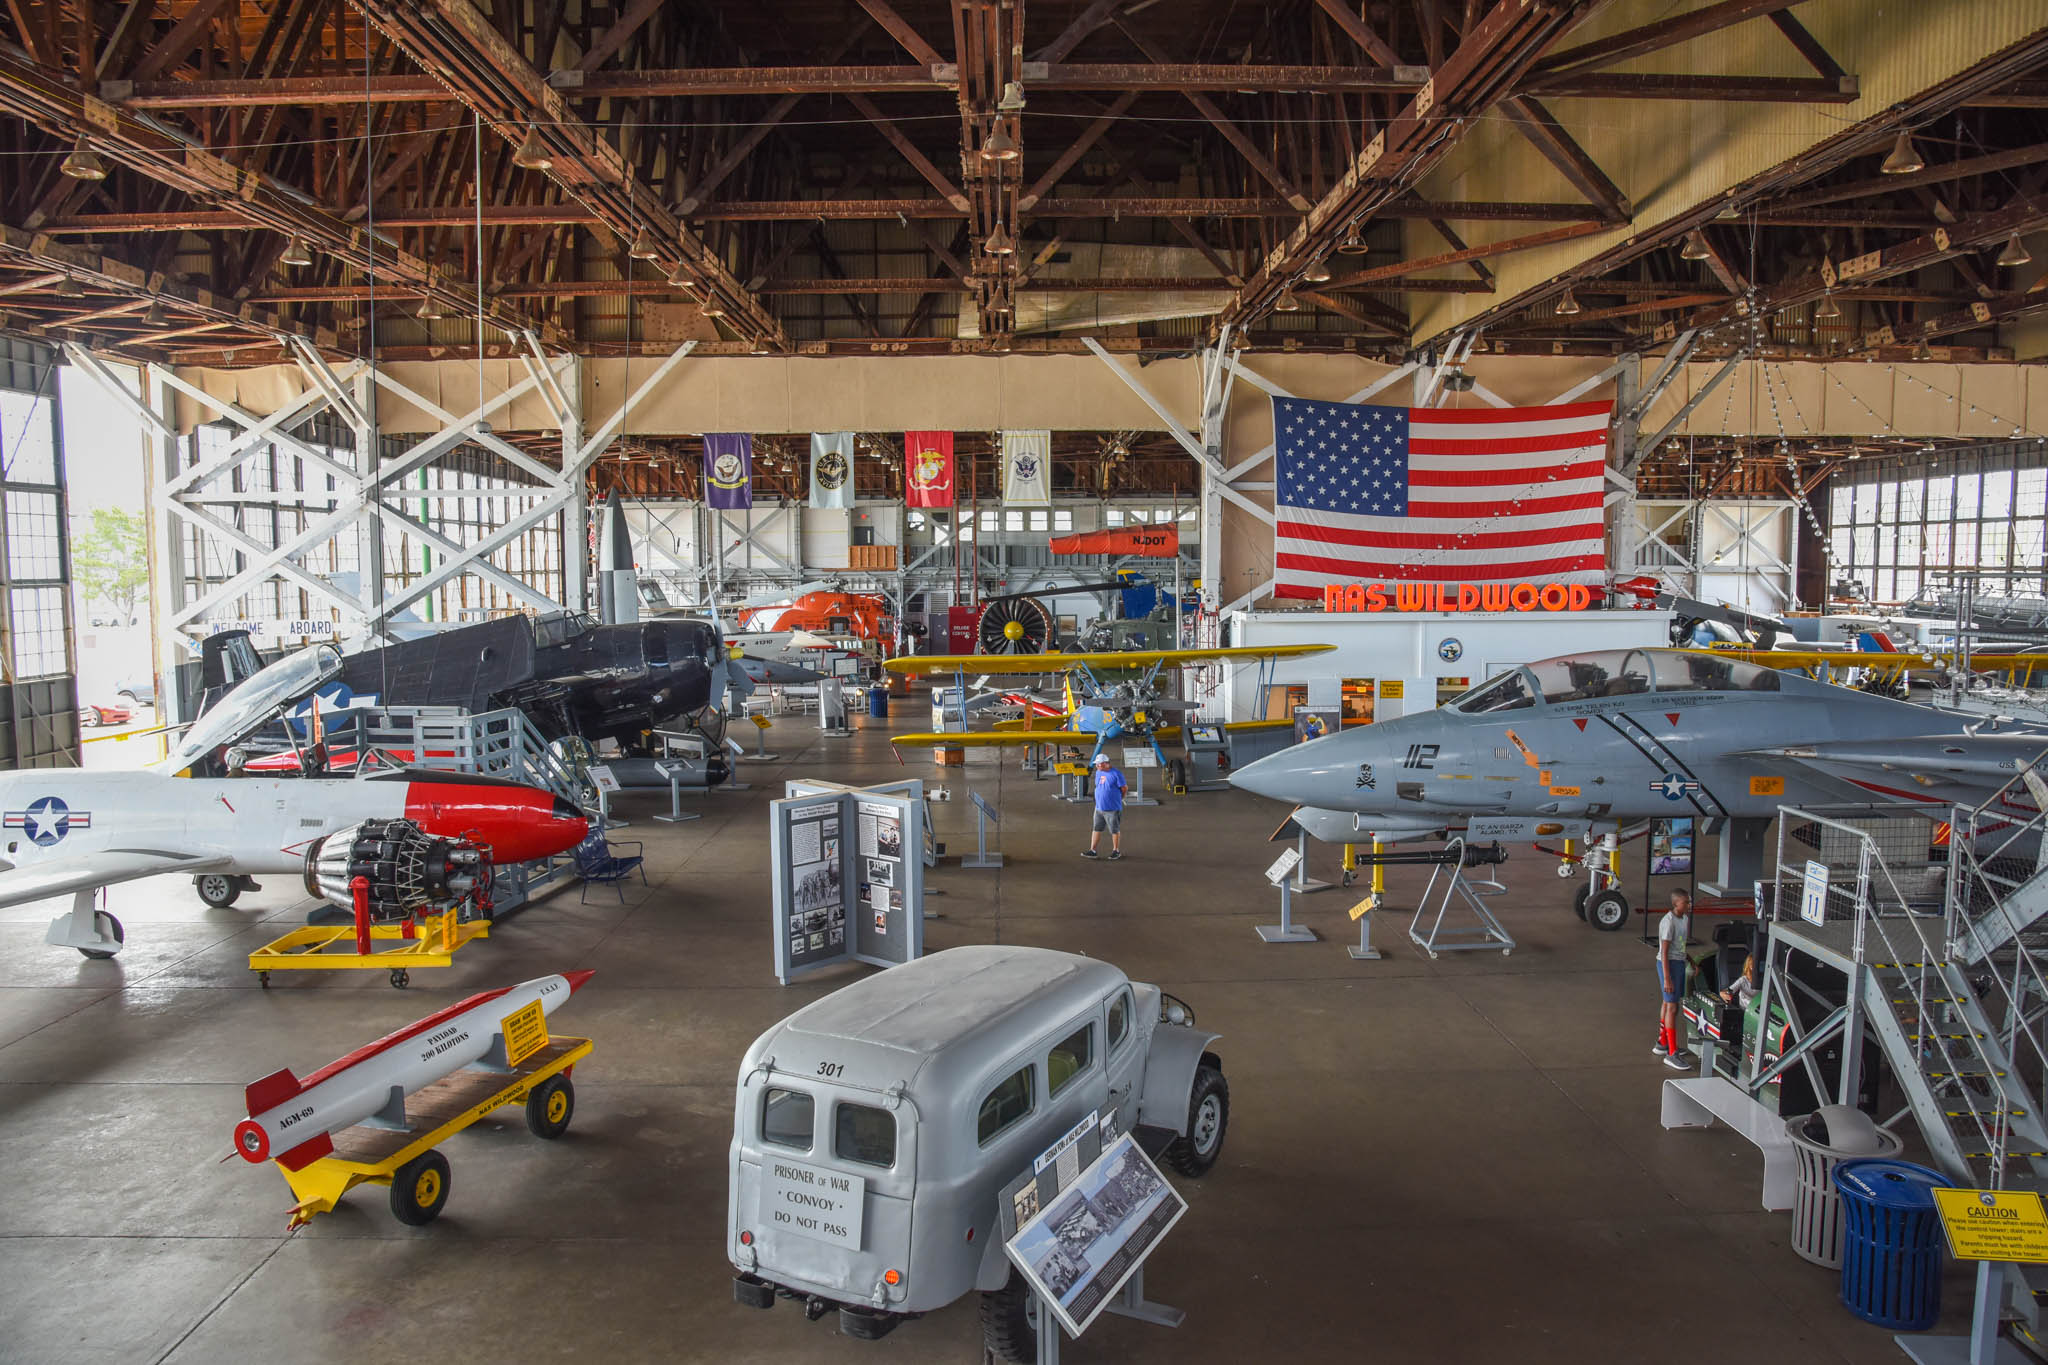 Looking down at all the plains and displays at the Naval Air Station Wildwood (NASW) Aviation Museum